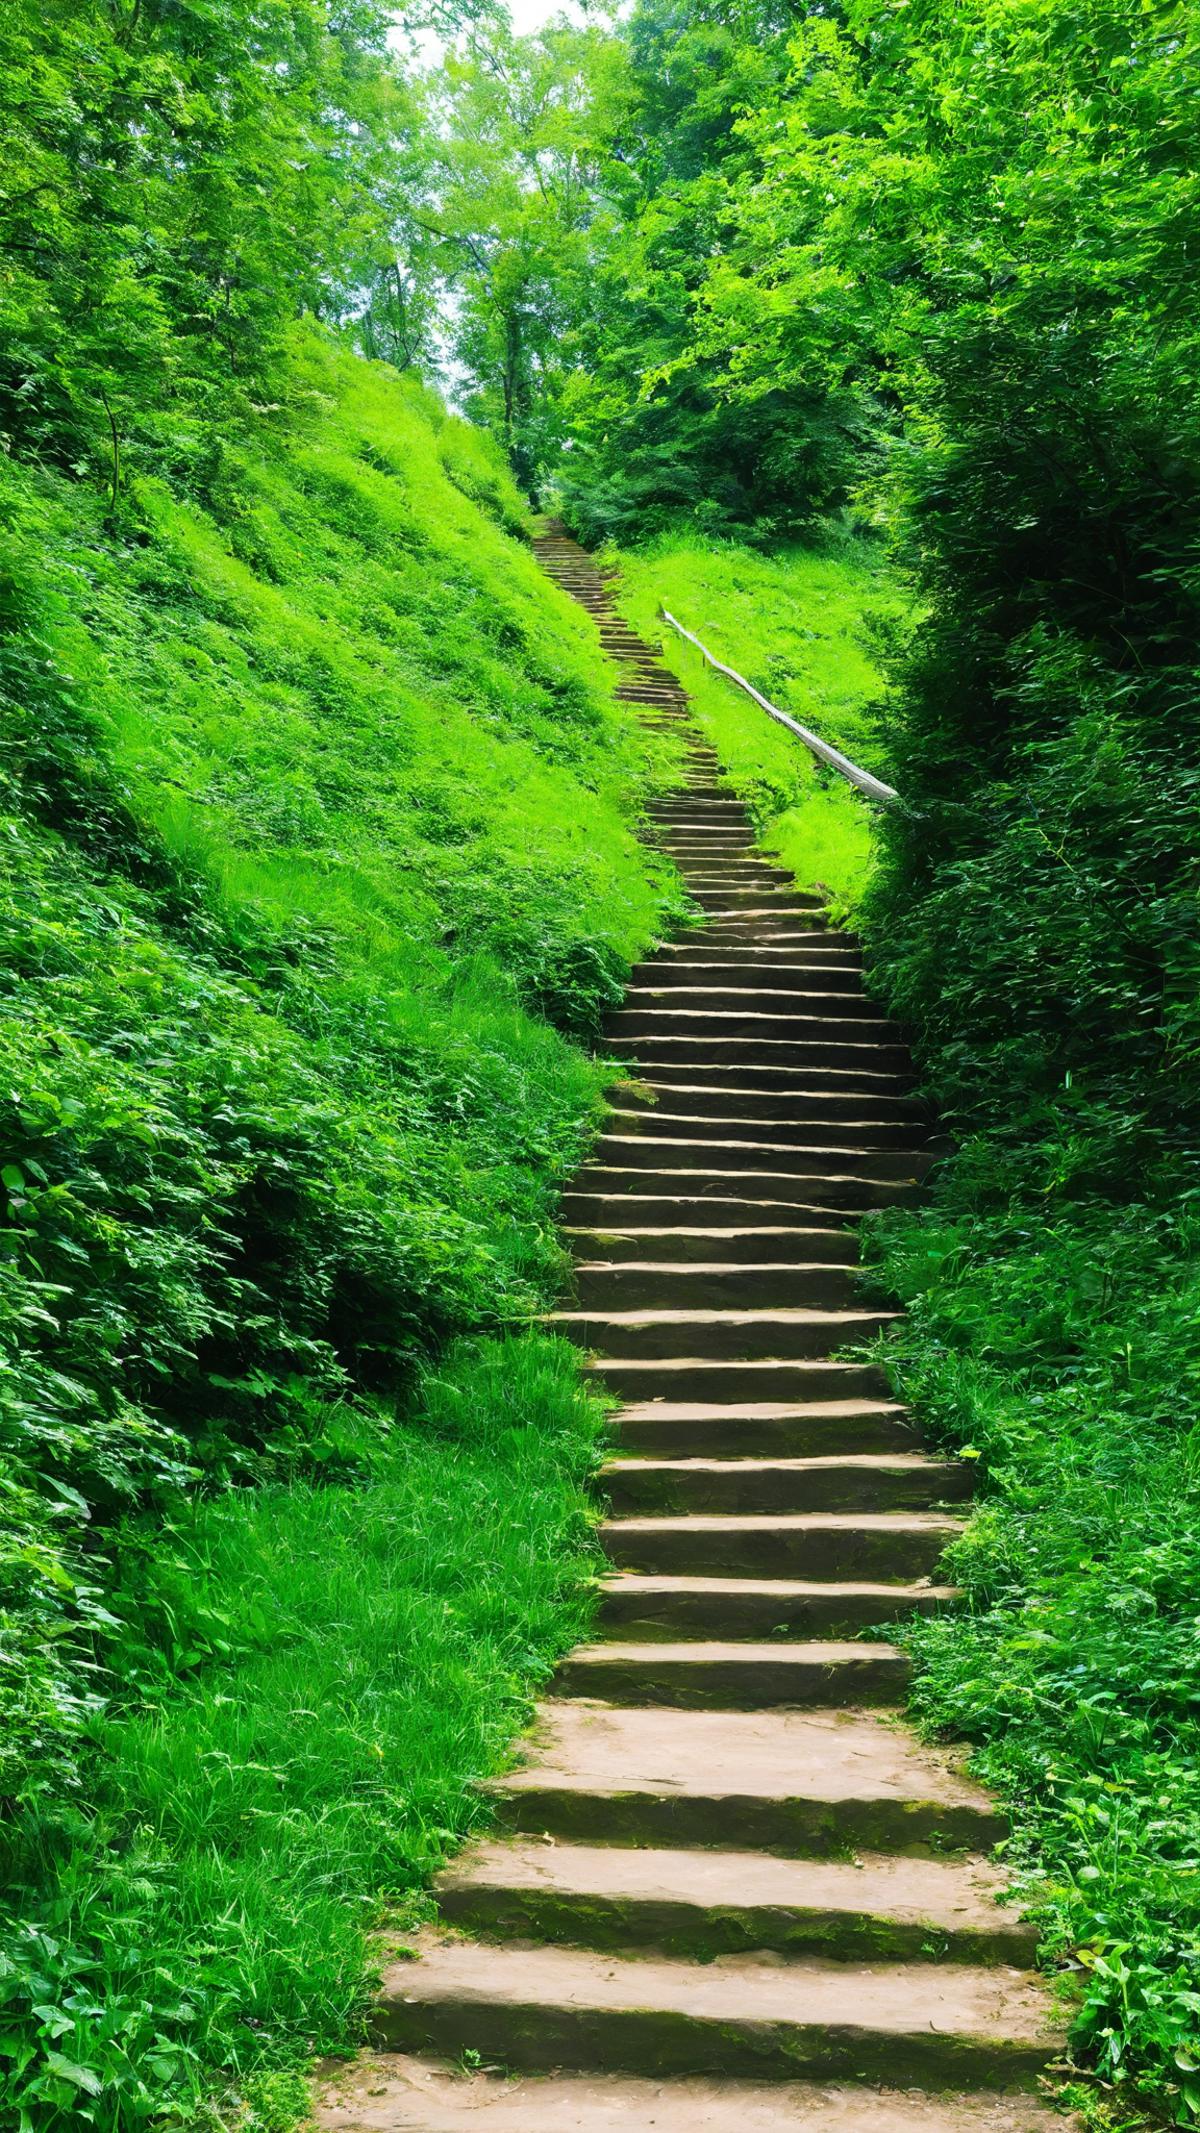 A stairway in a grassy forest, surrounded by green bushes and trees.